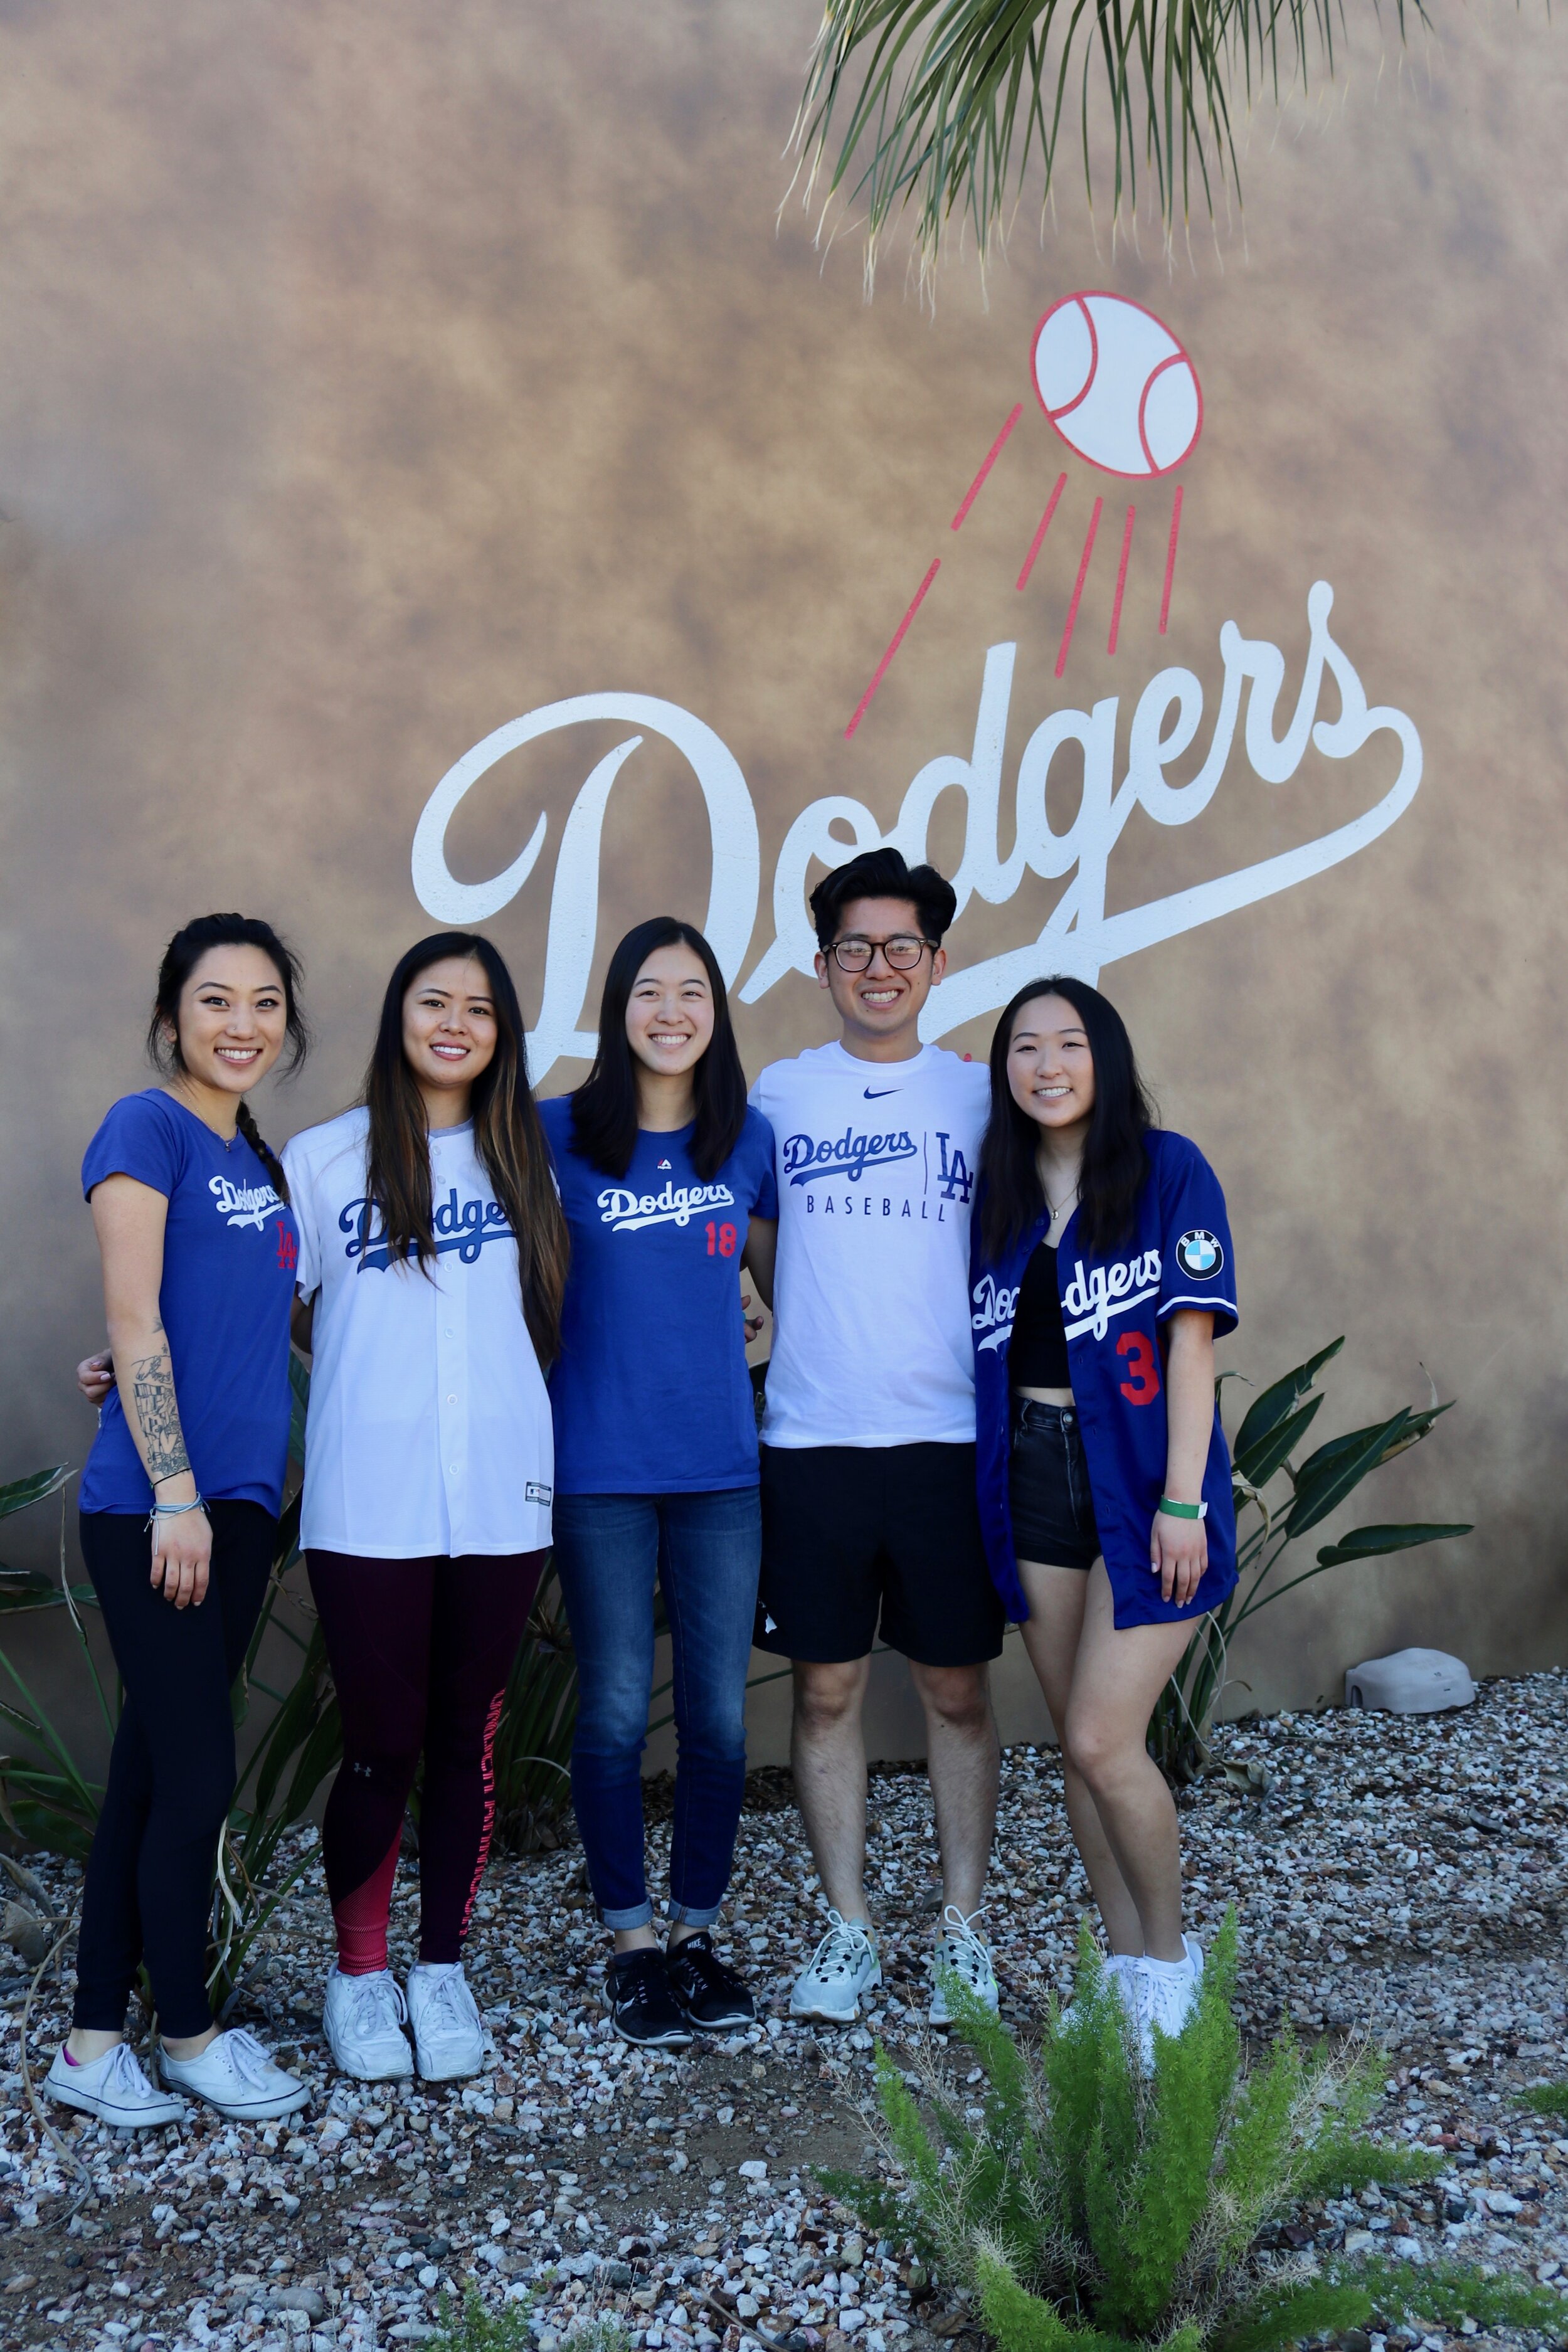 A group of men and women smile wearing Dodger’s shirts in front of the Dodger’s painted sign on a building. 